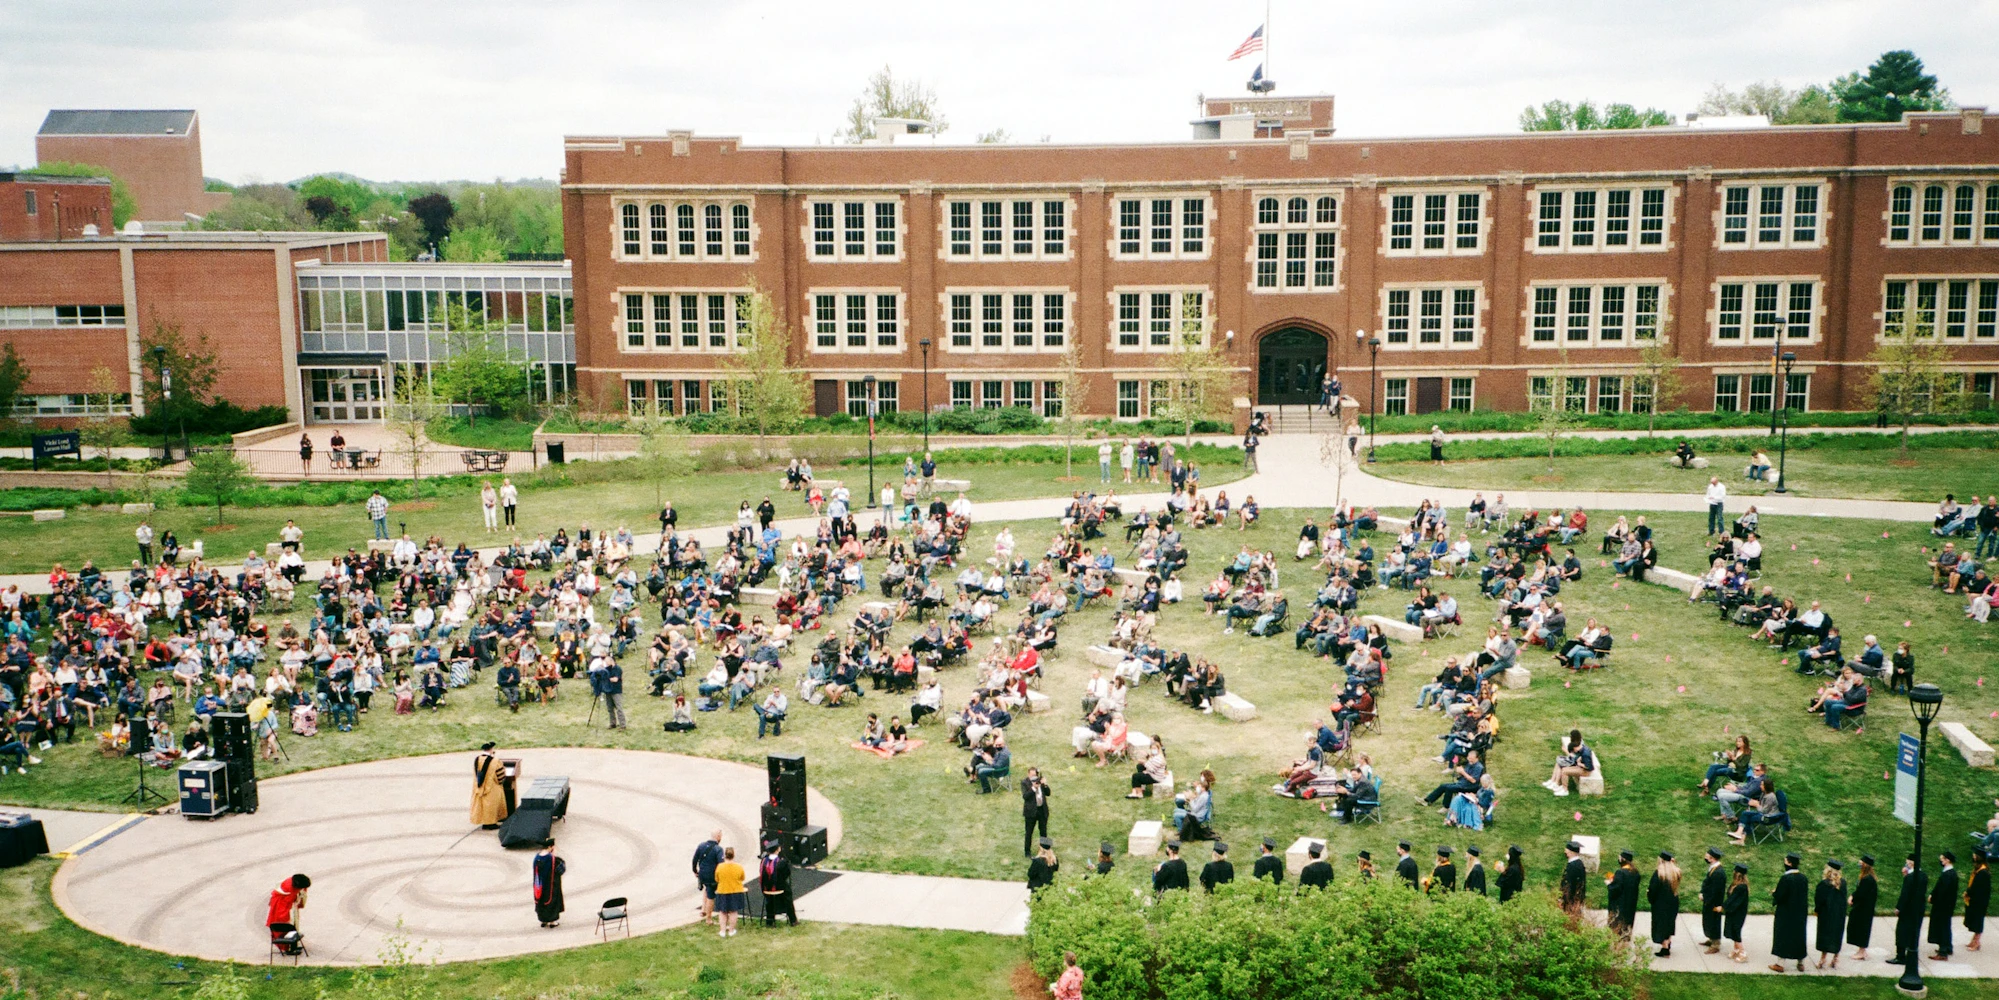 Students assembled outdoors on a college campus, listening to a speaker.